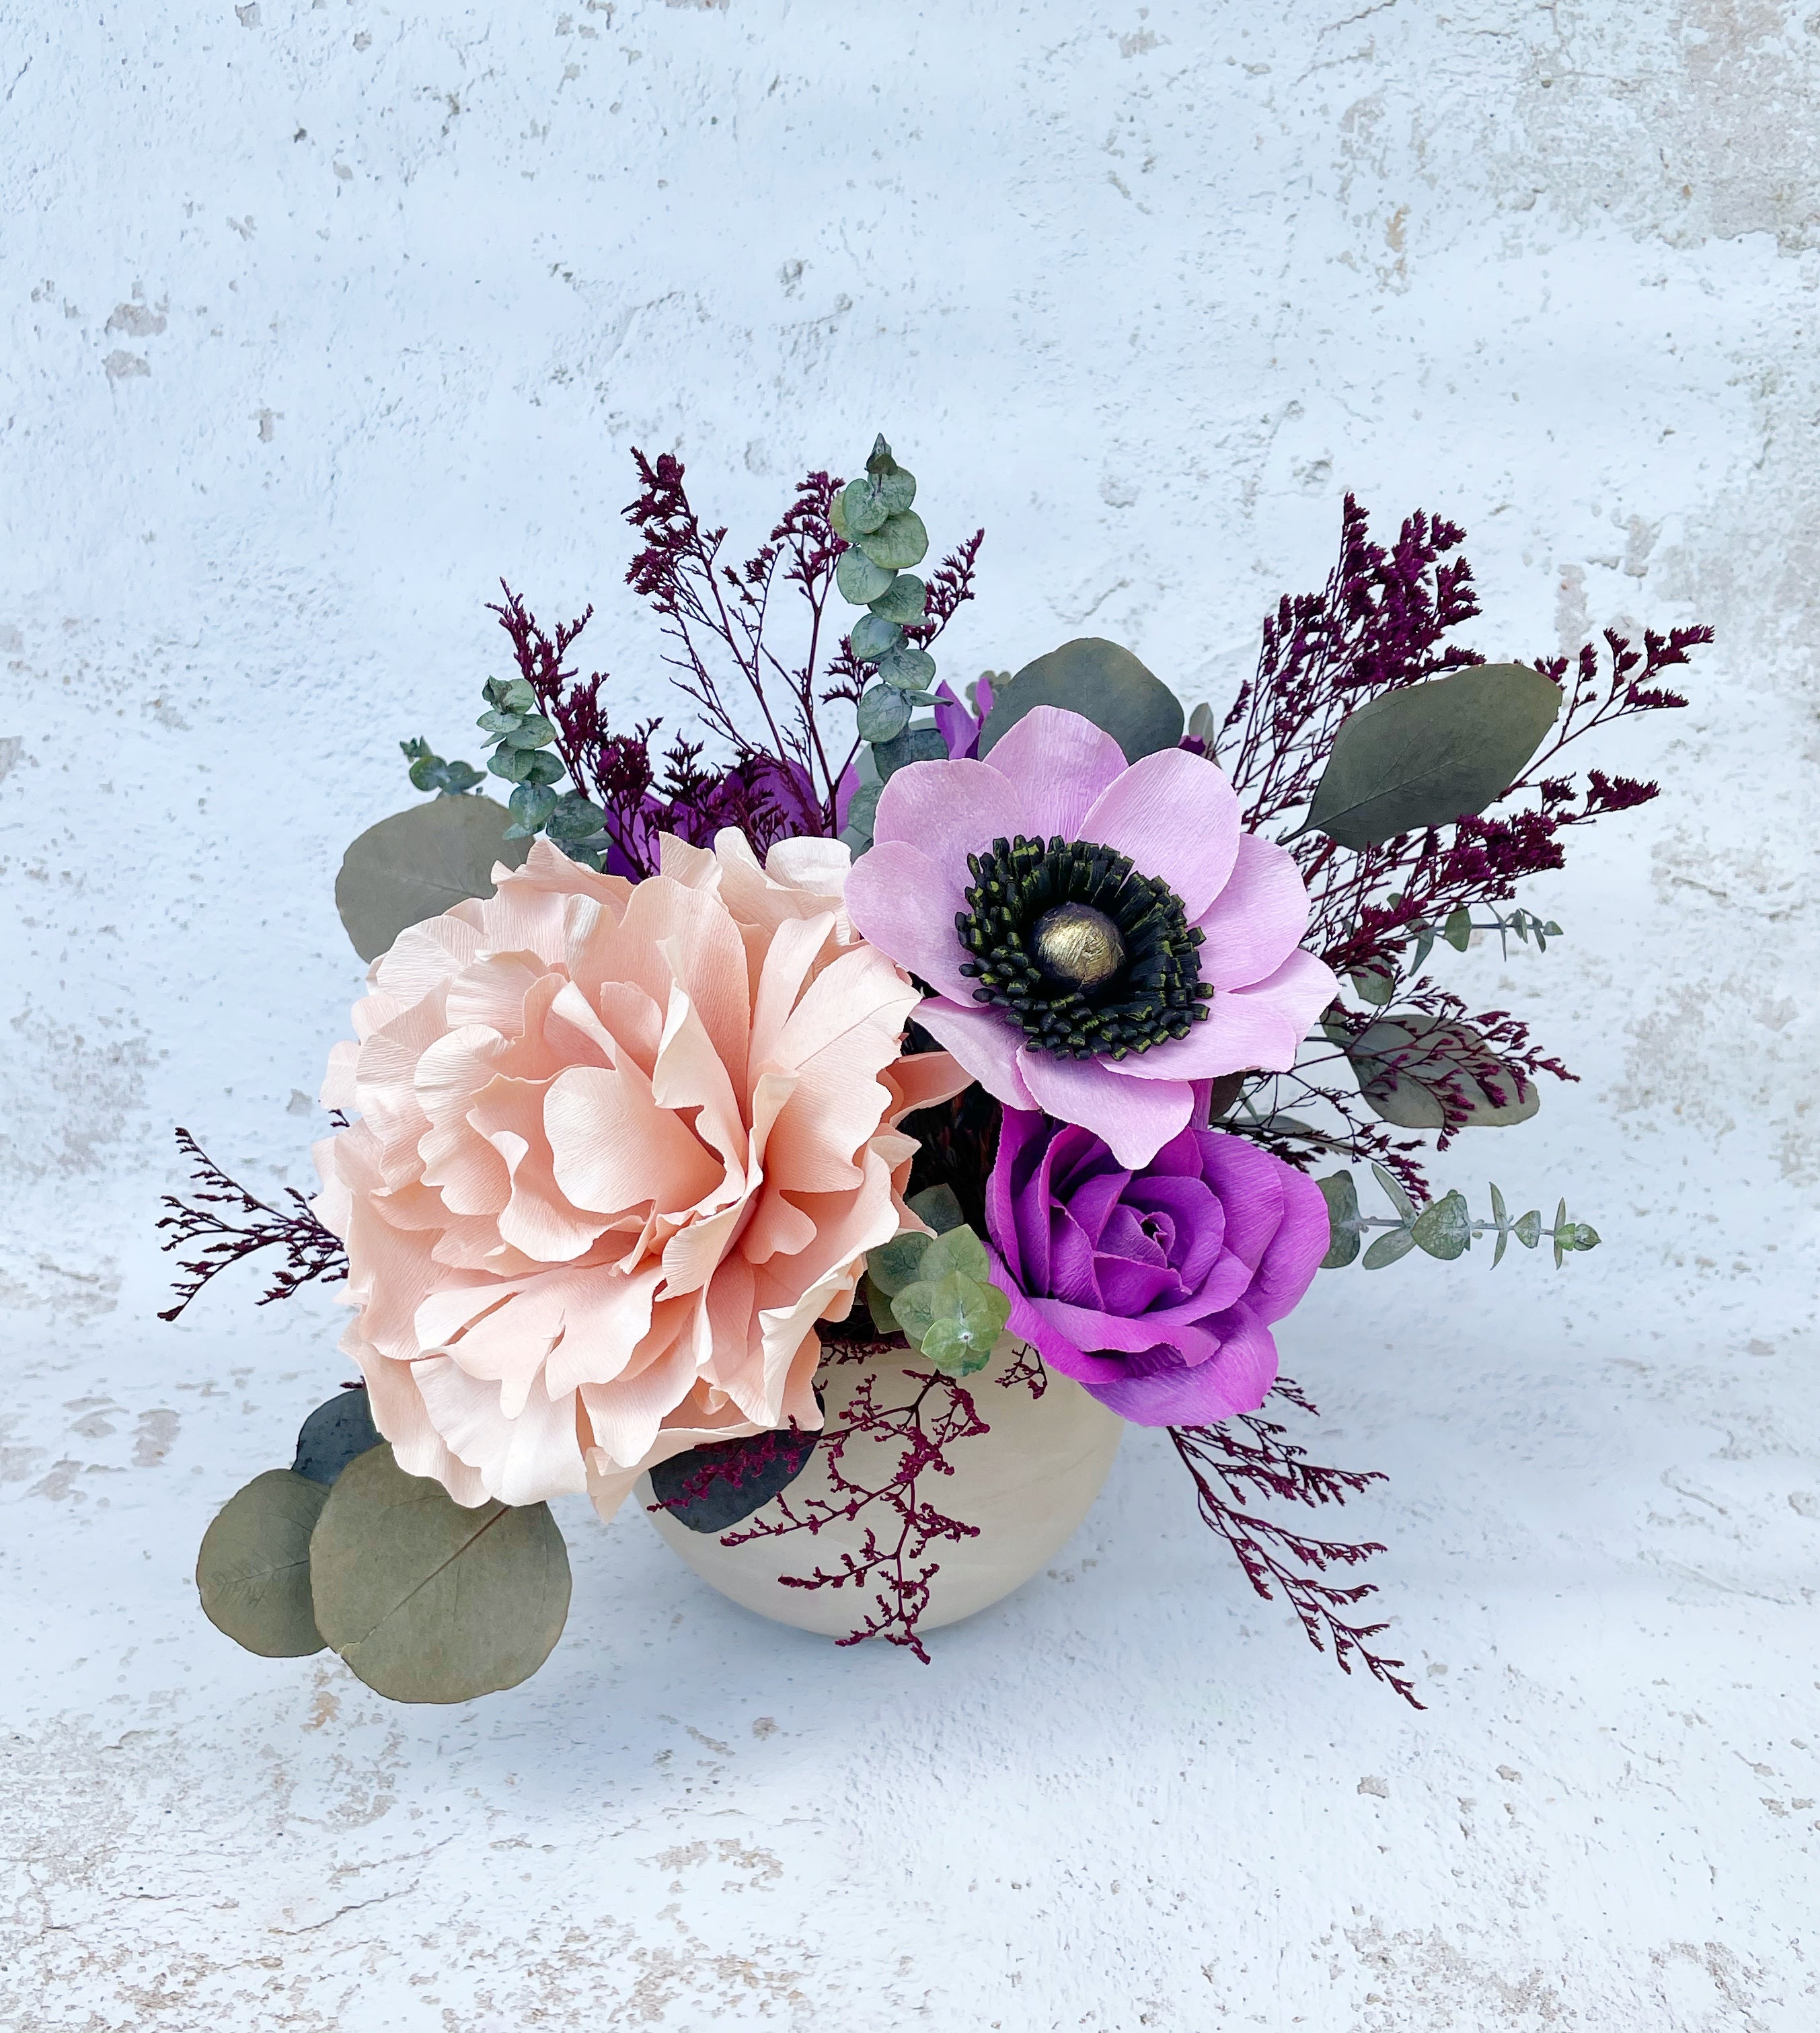 Boho Blooms Hawaii: Handcrafted Paper Flowers